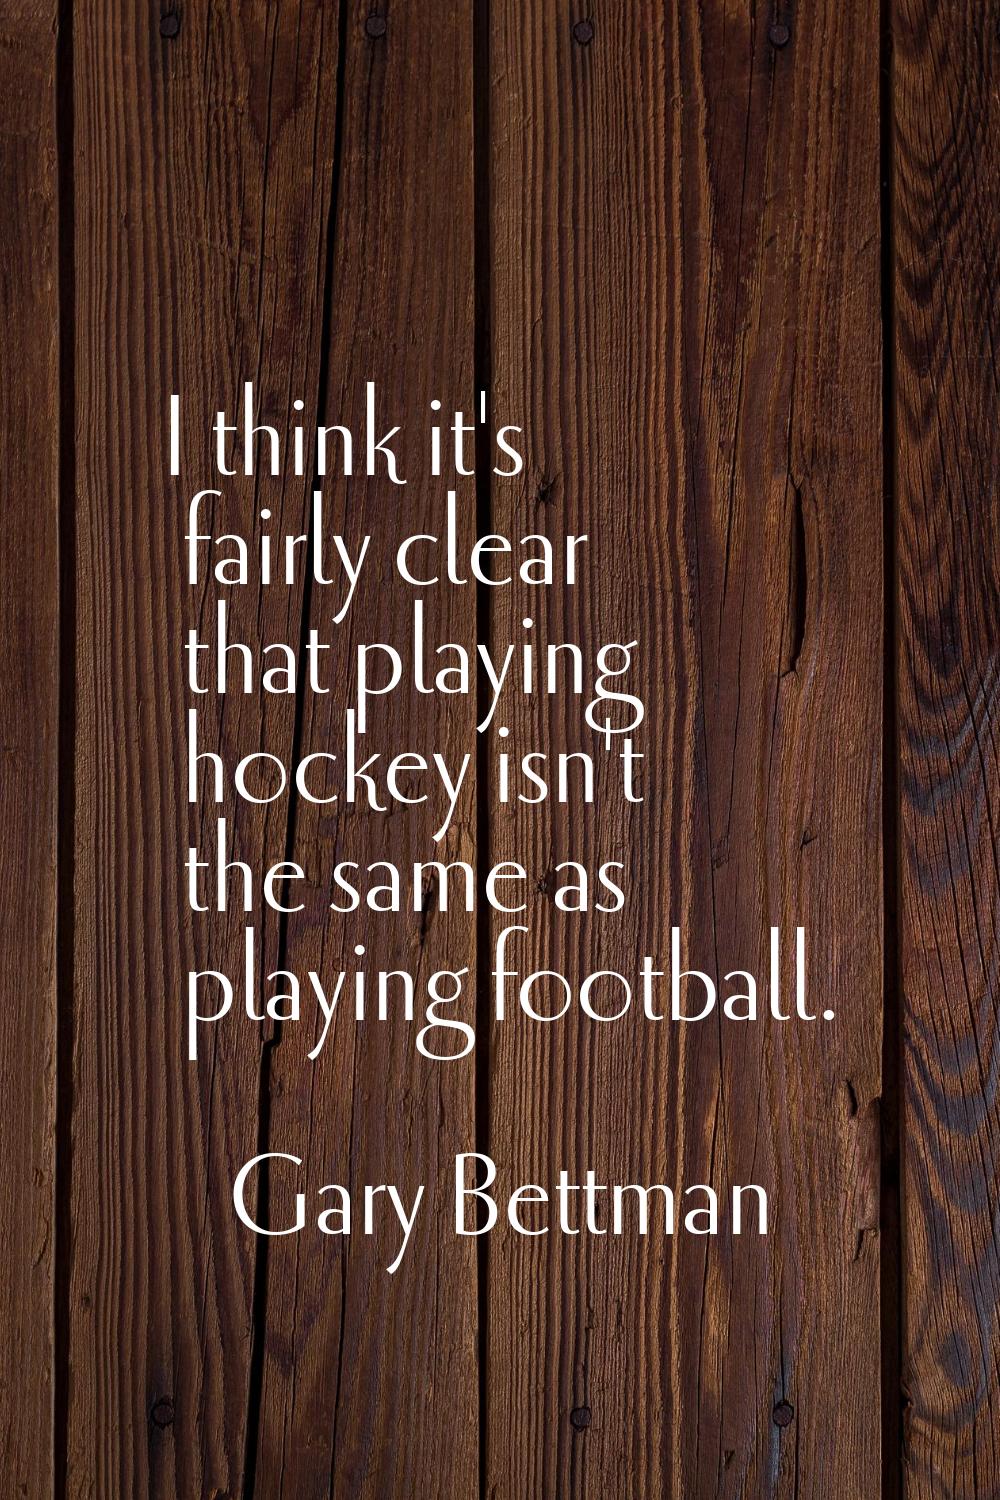 I think it's fairly clear that playing hockey isn't the same as playing football.